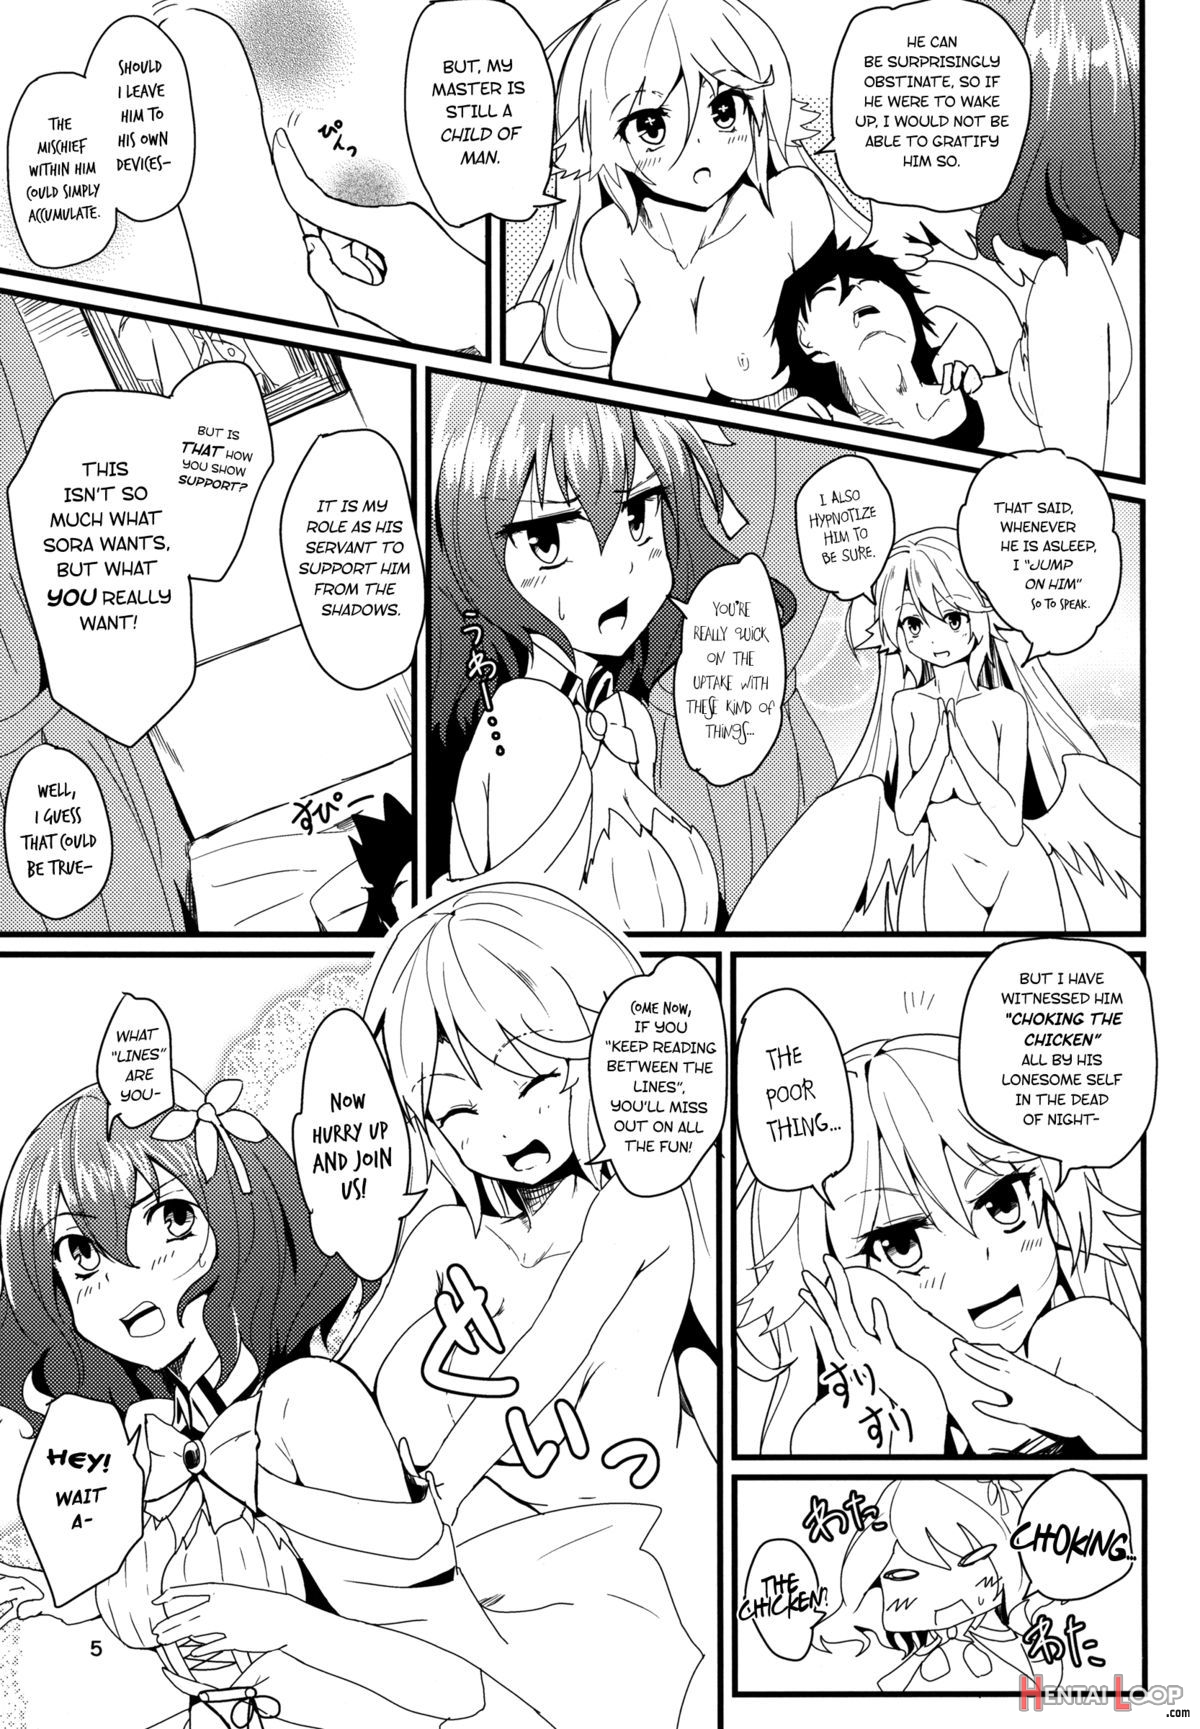 Jibril And Steph's Attempts At Service page 5